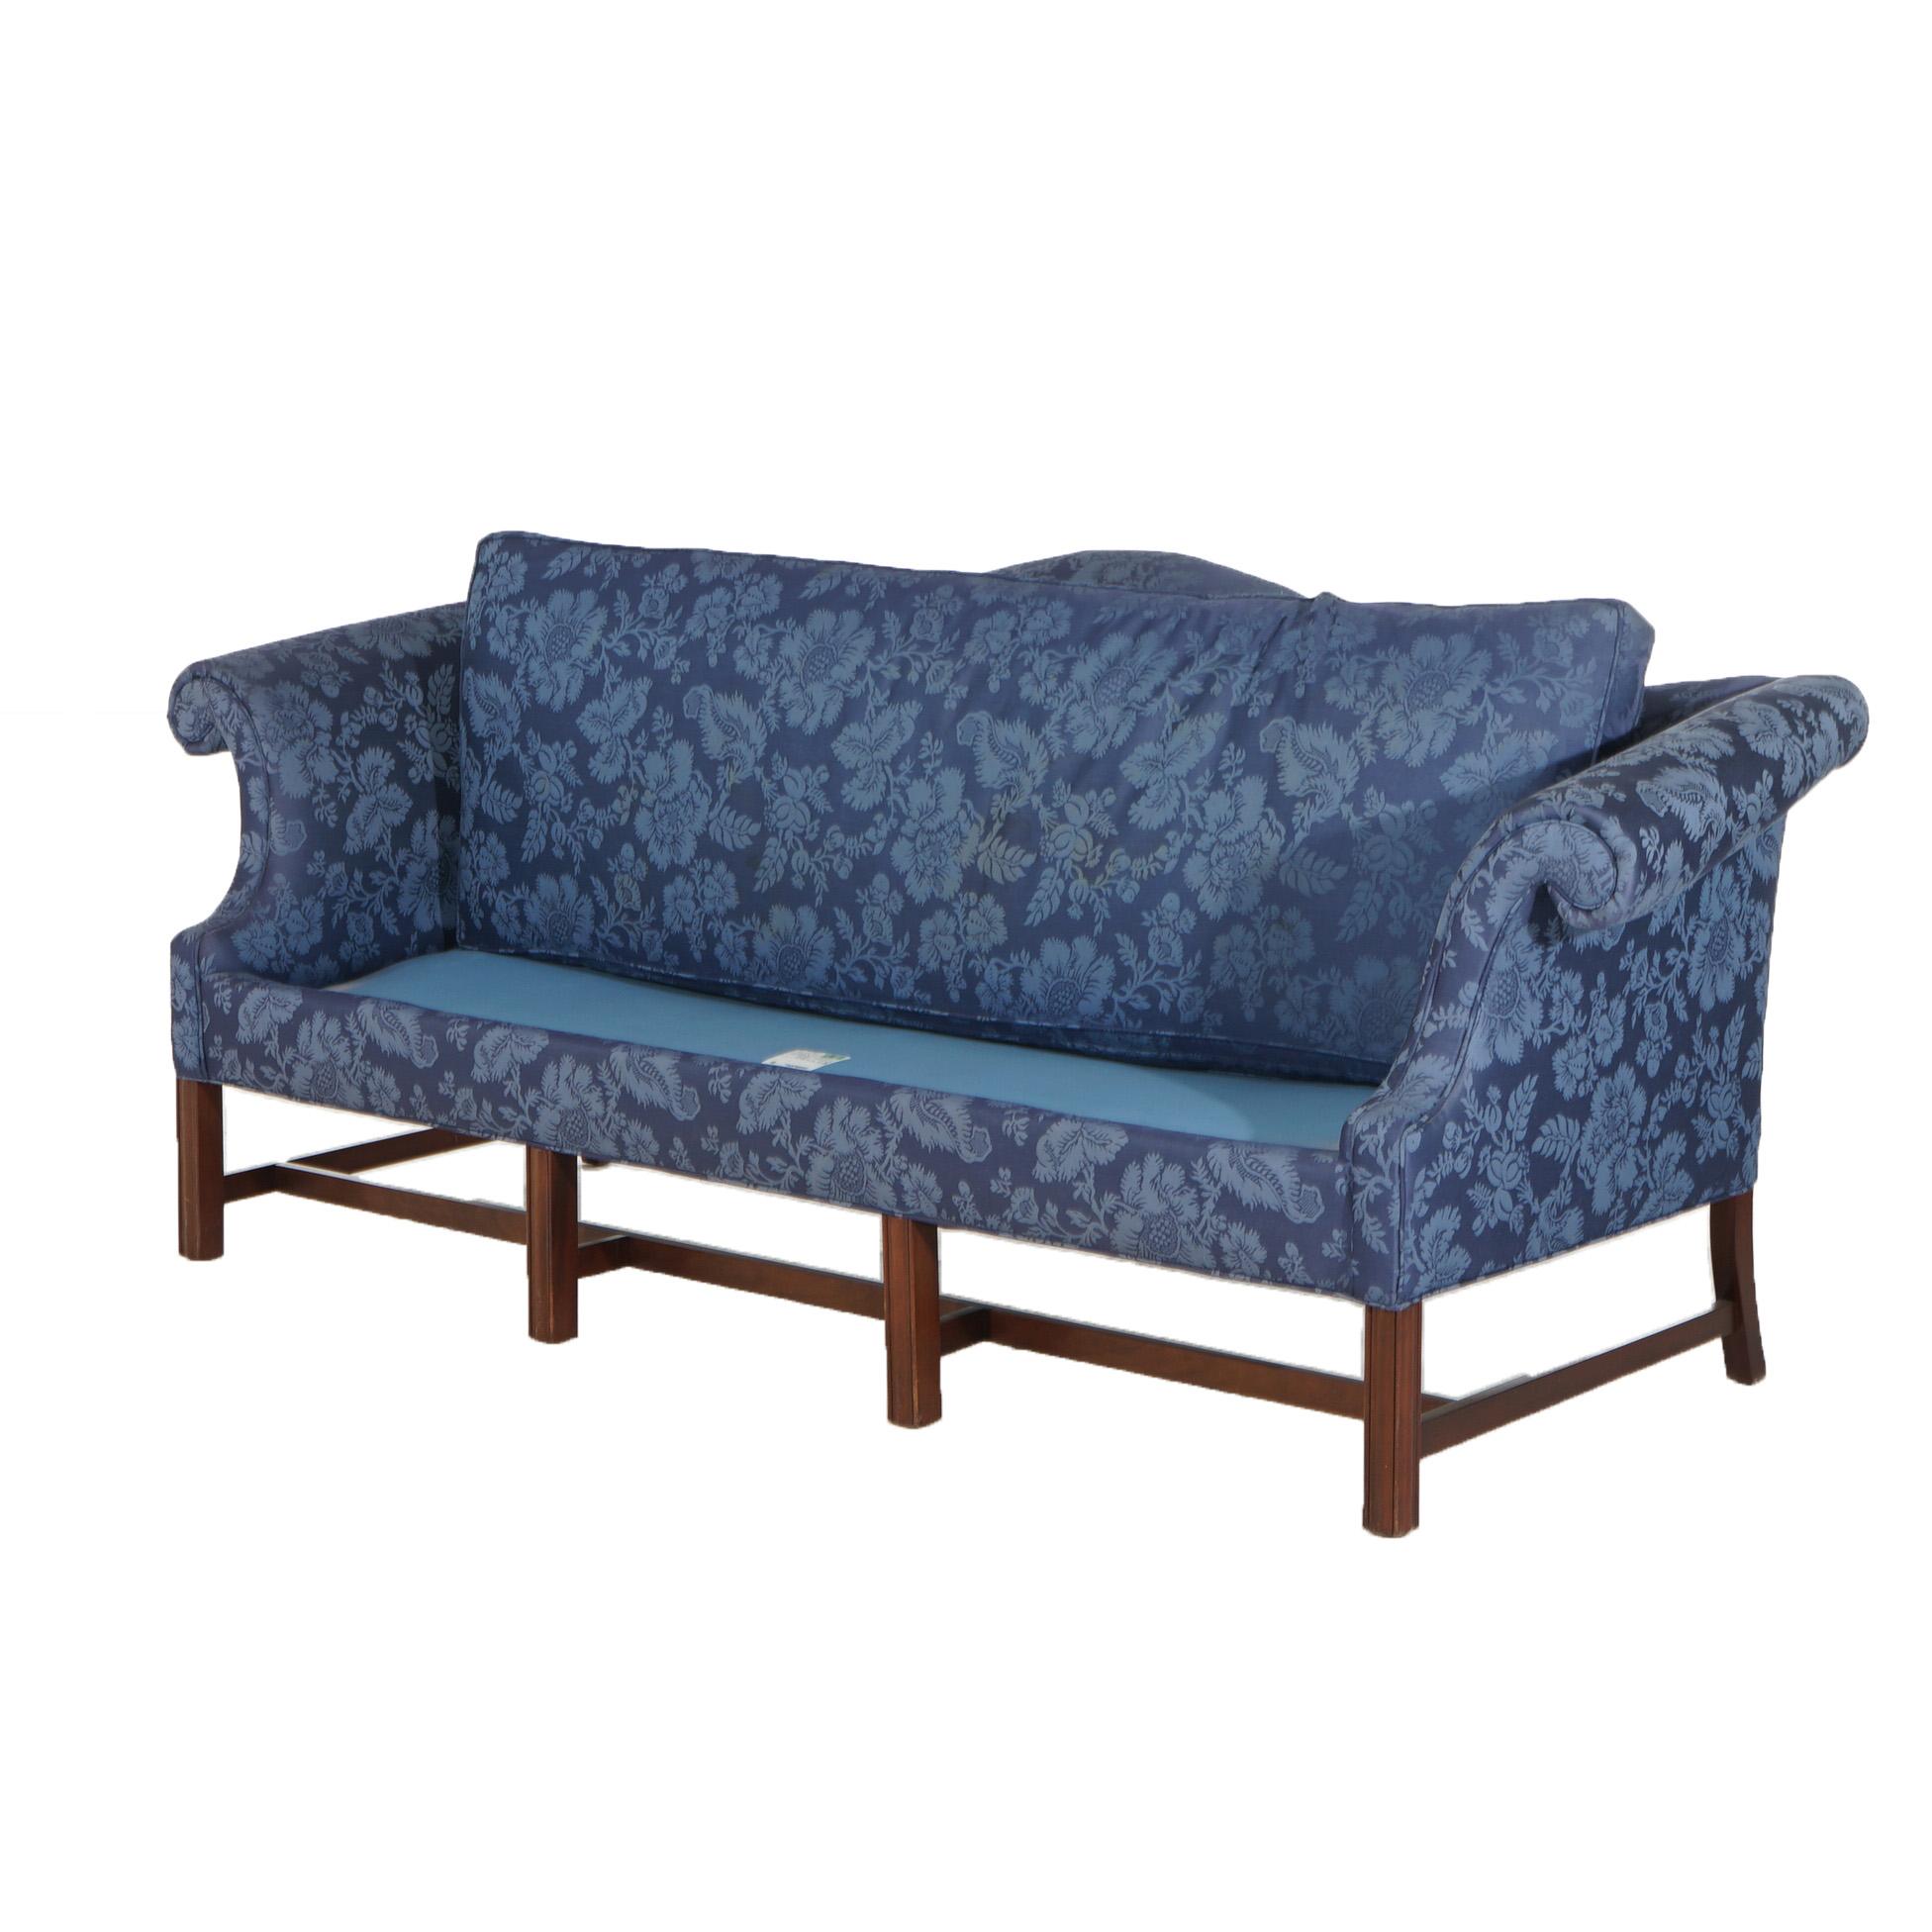 Antique Chippendale Camelback Sofa with Scroll Arms, Blue, C1930 For Sale 1